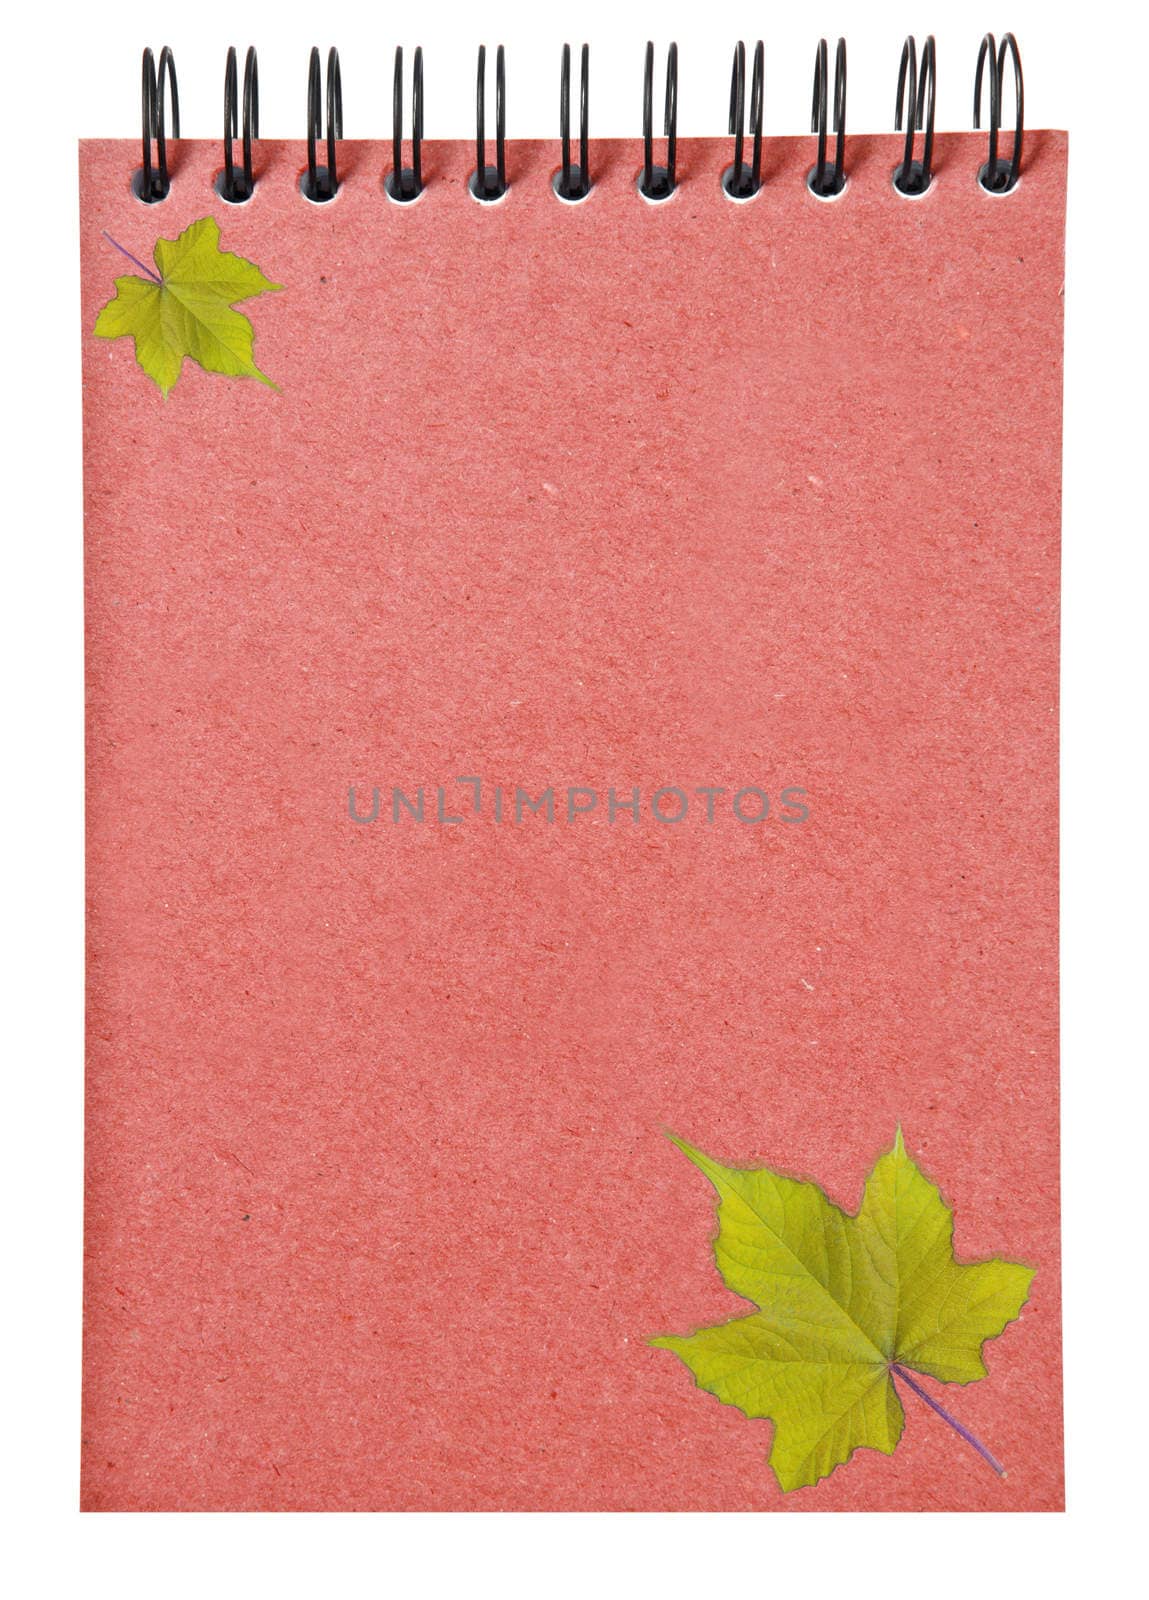 leaves on ring binder red book isolated on white background, clipping path